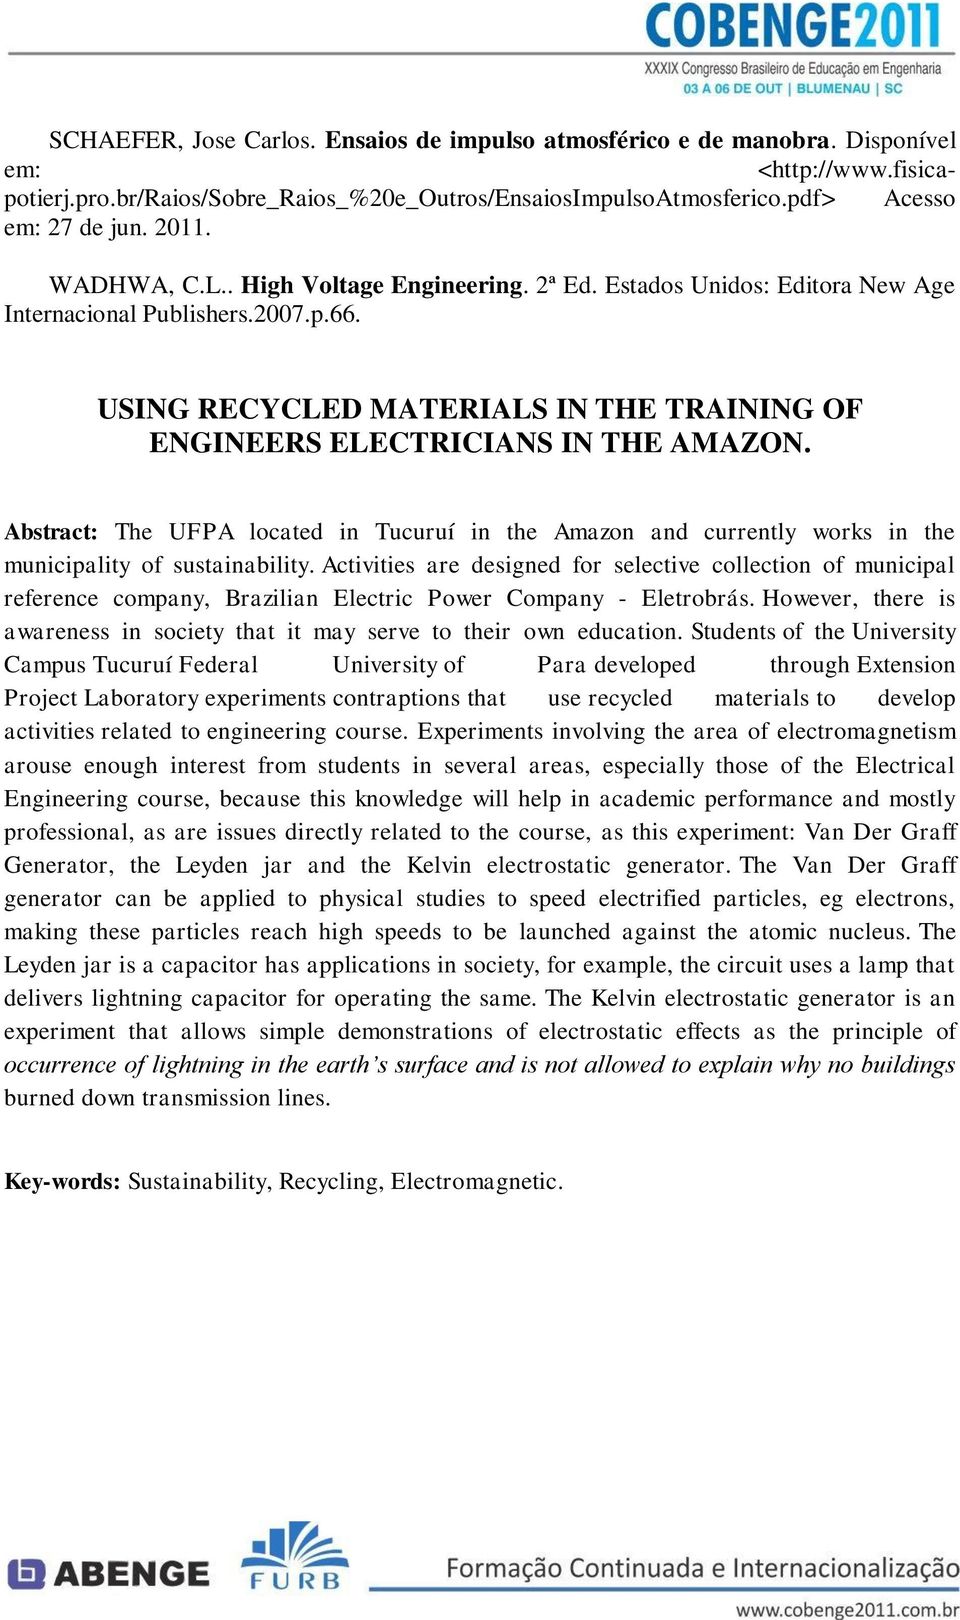 USING RECYCLED MATERIALS IN THE TRAINING OF ENGINEERS ELECTRICIANS IN THE AMAZON. Abstract: The UFPA located in Tucuruí in the Amazon and currently works in the municipality of sustainability.